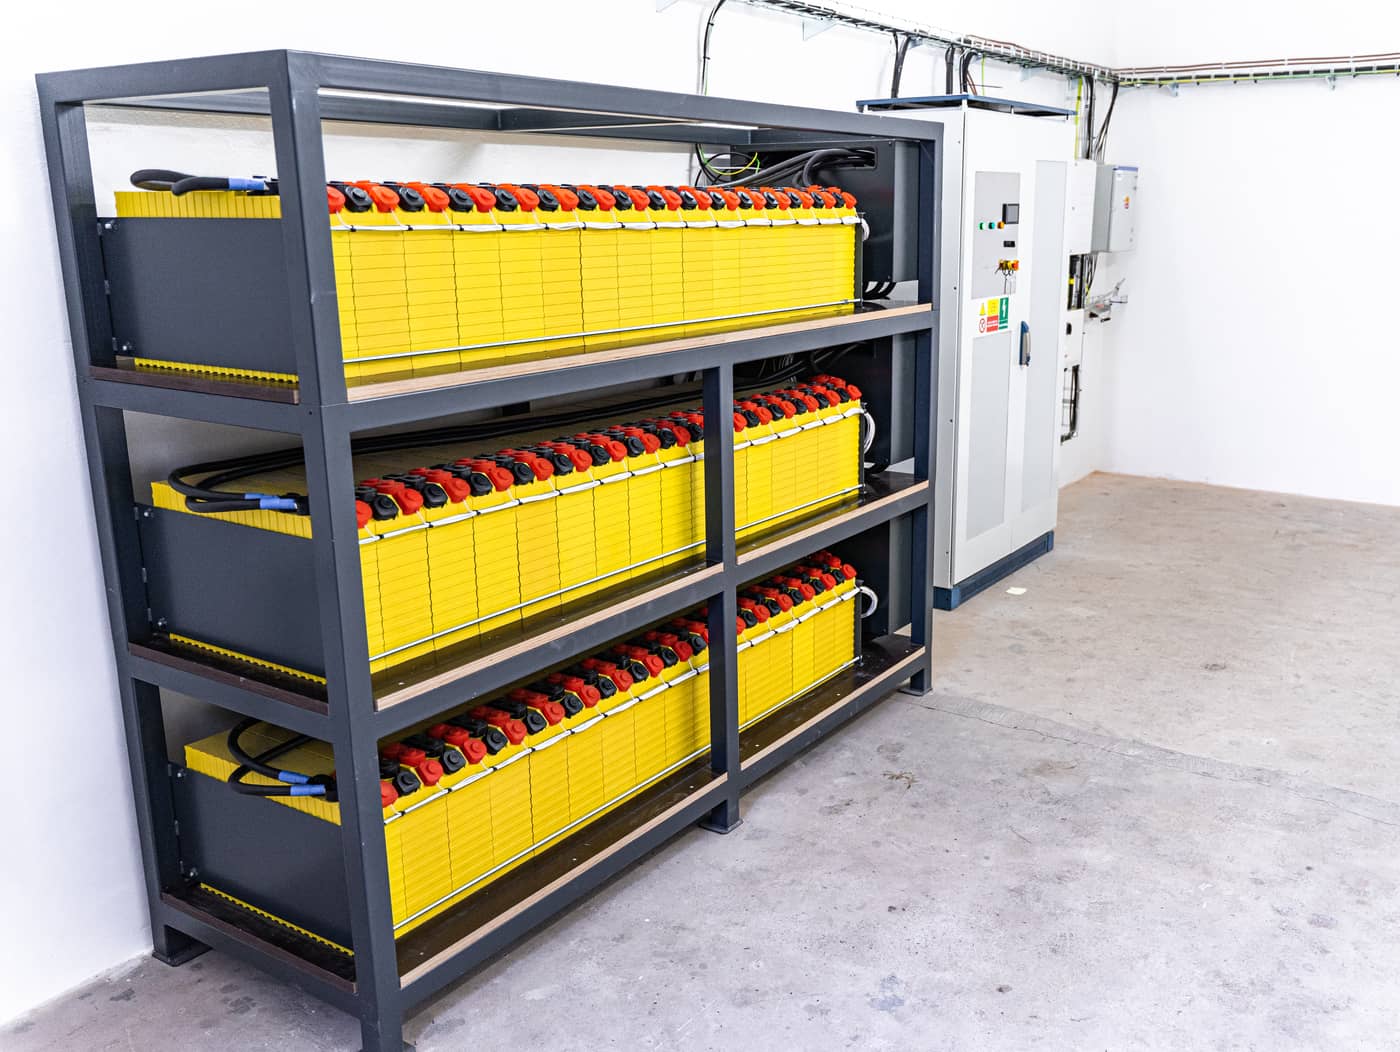 Dependence on China is dangerous, say the founders of the Czech manufacturer of European battery storage AMVOLT